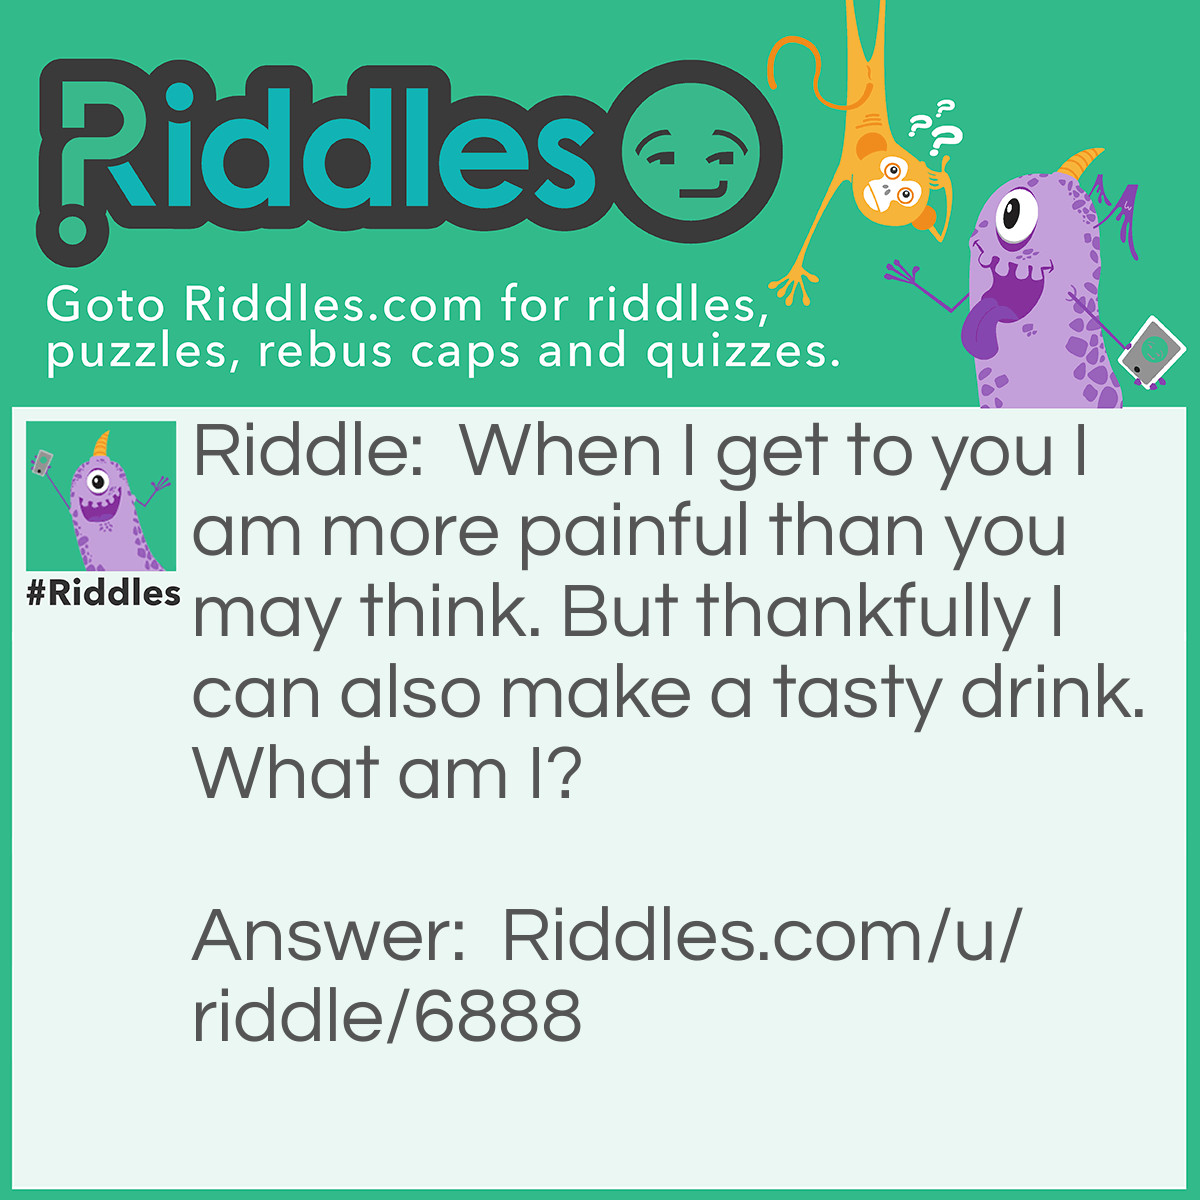 Riddle: When I get to you I am more painful than you may think. But thankfully I can also make a tasty drink. What am I? Answer: A punch.